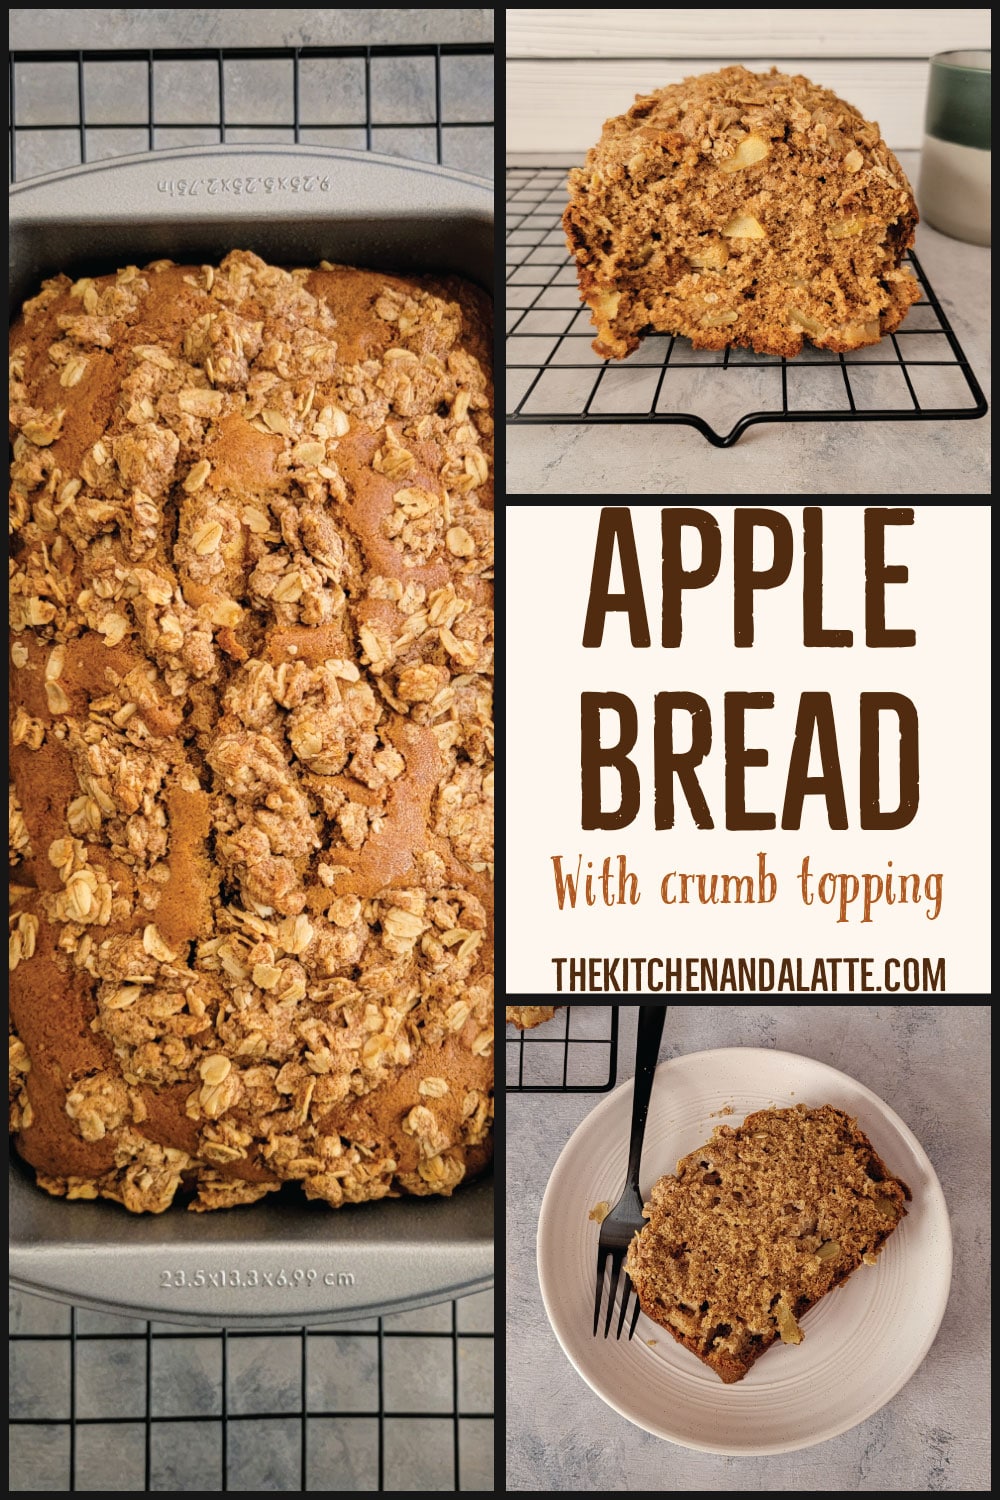 Pinterest image - Apple bread with crumb topping. 3 images - 1 is apple bread cooling in bread pan, 2 is a slice of bread on a plate to serve, 3 is the bread cut to show the inside of bread.